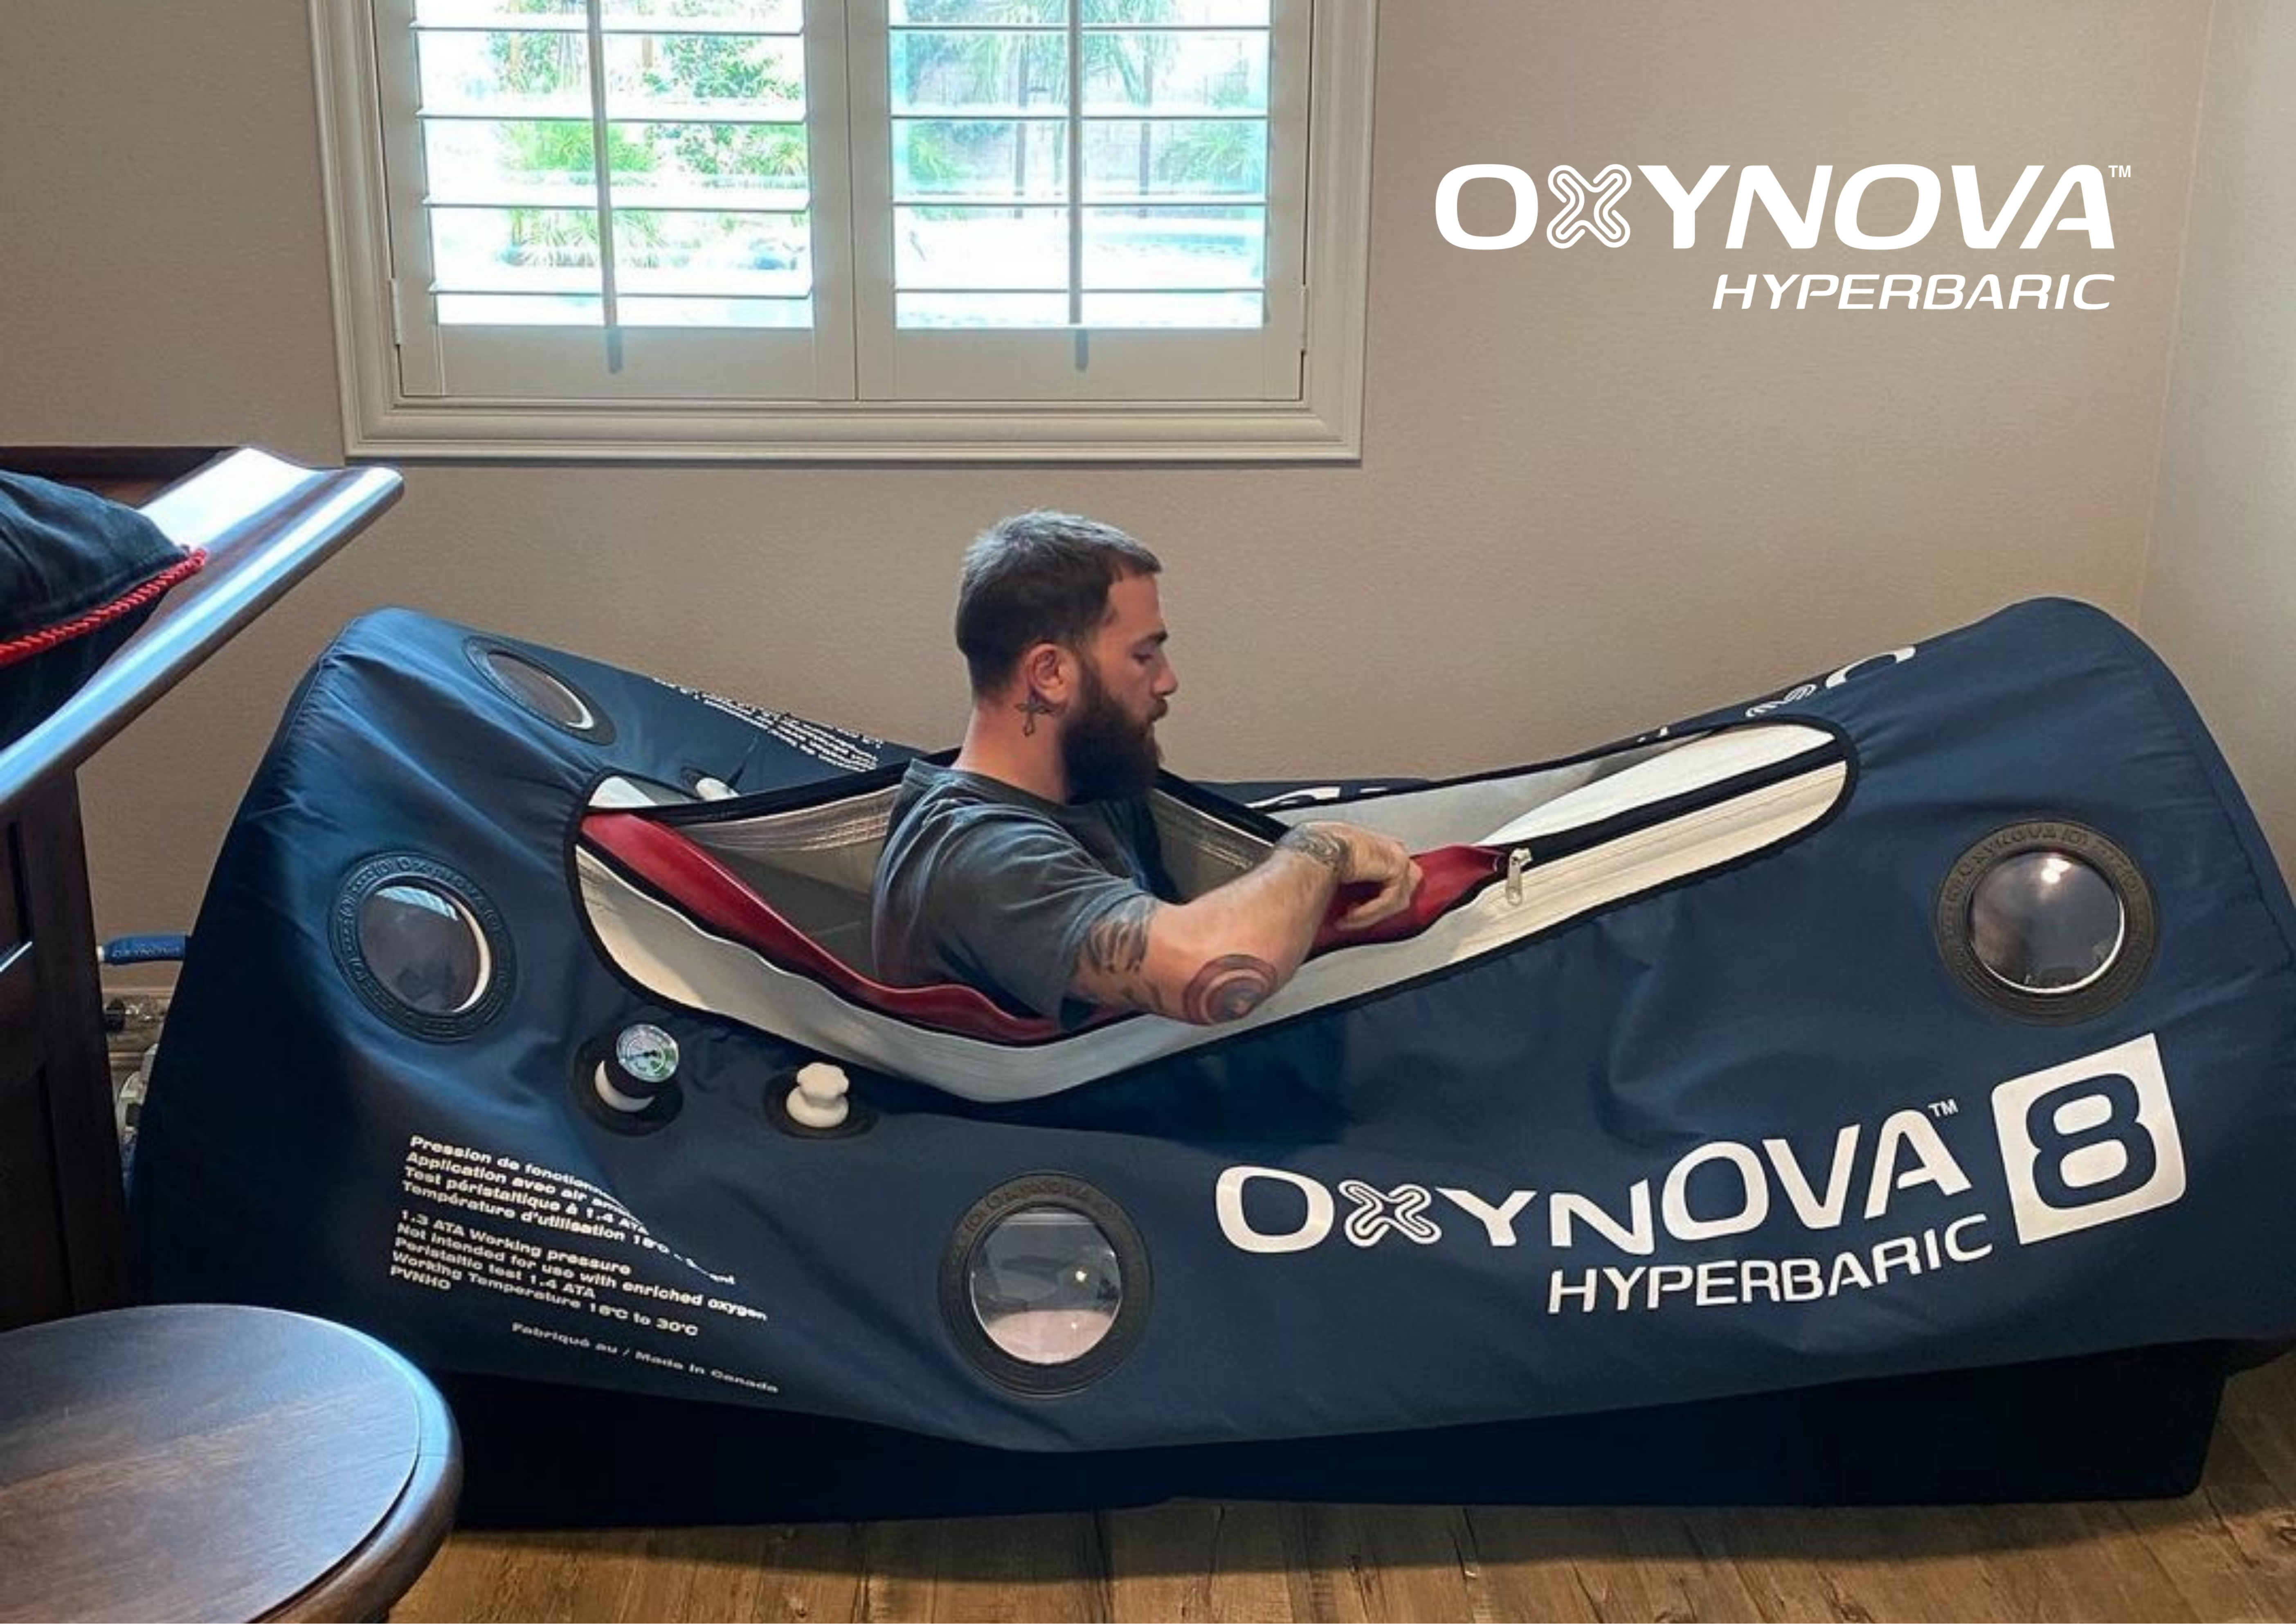 The effects of mild hyperbaric oxygen therapy before & after maximal exercise on lactate concentration, heart rate recovery, and antioxidant capacity